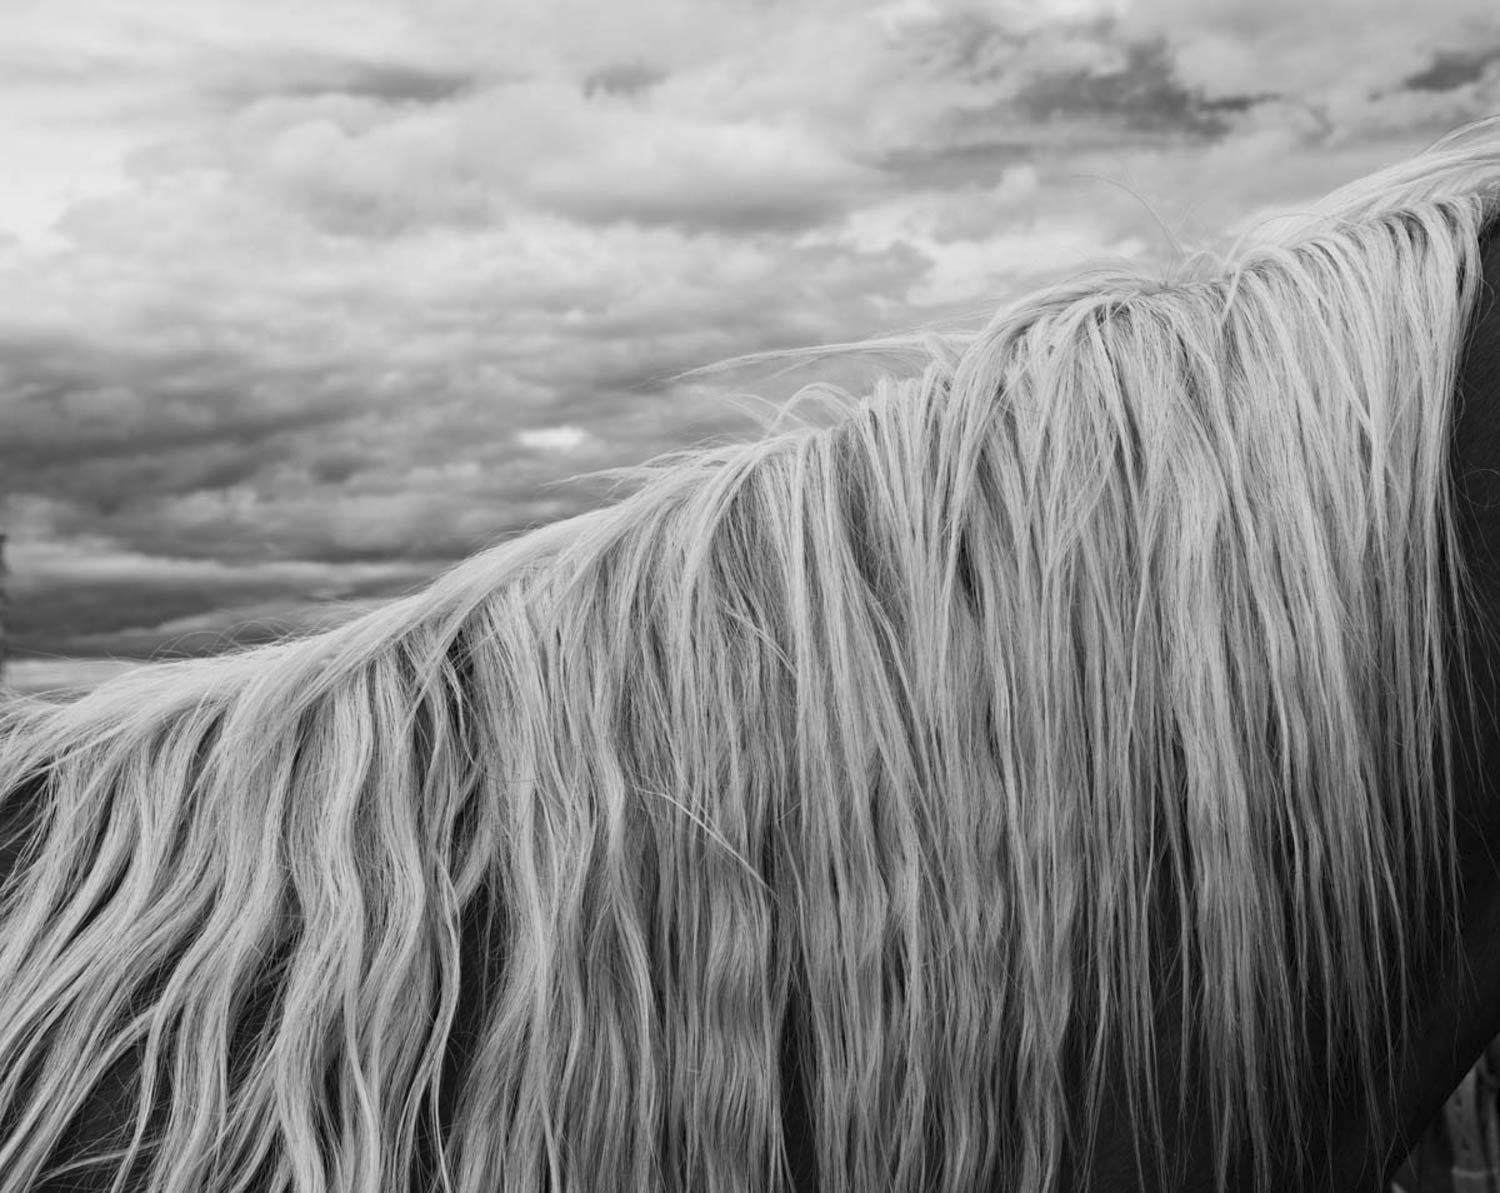 The Mane and Sky